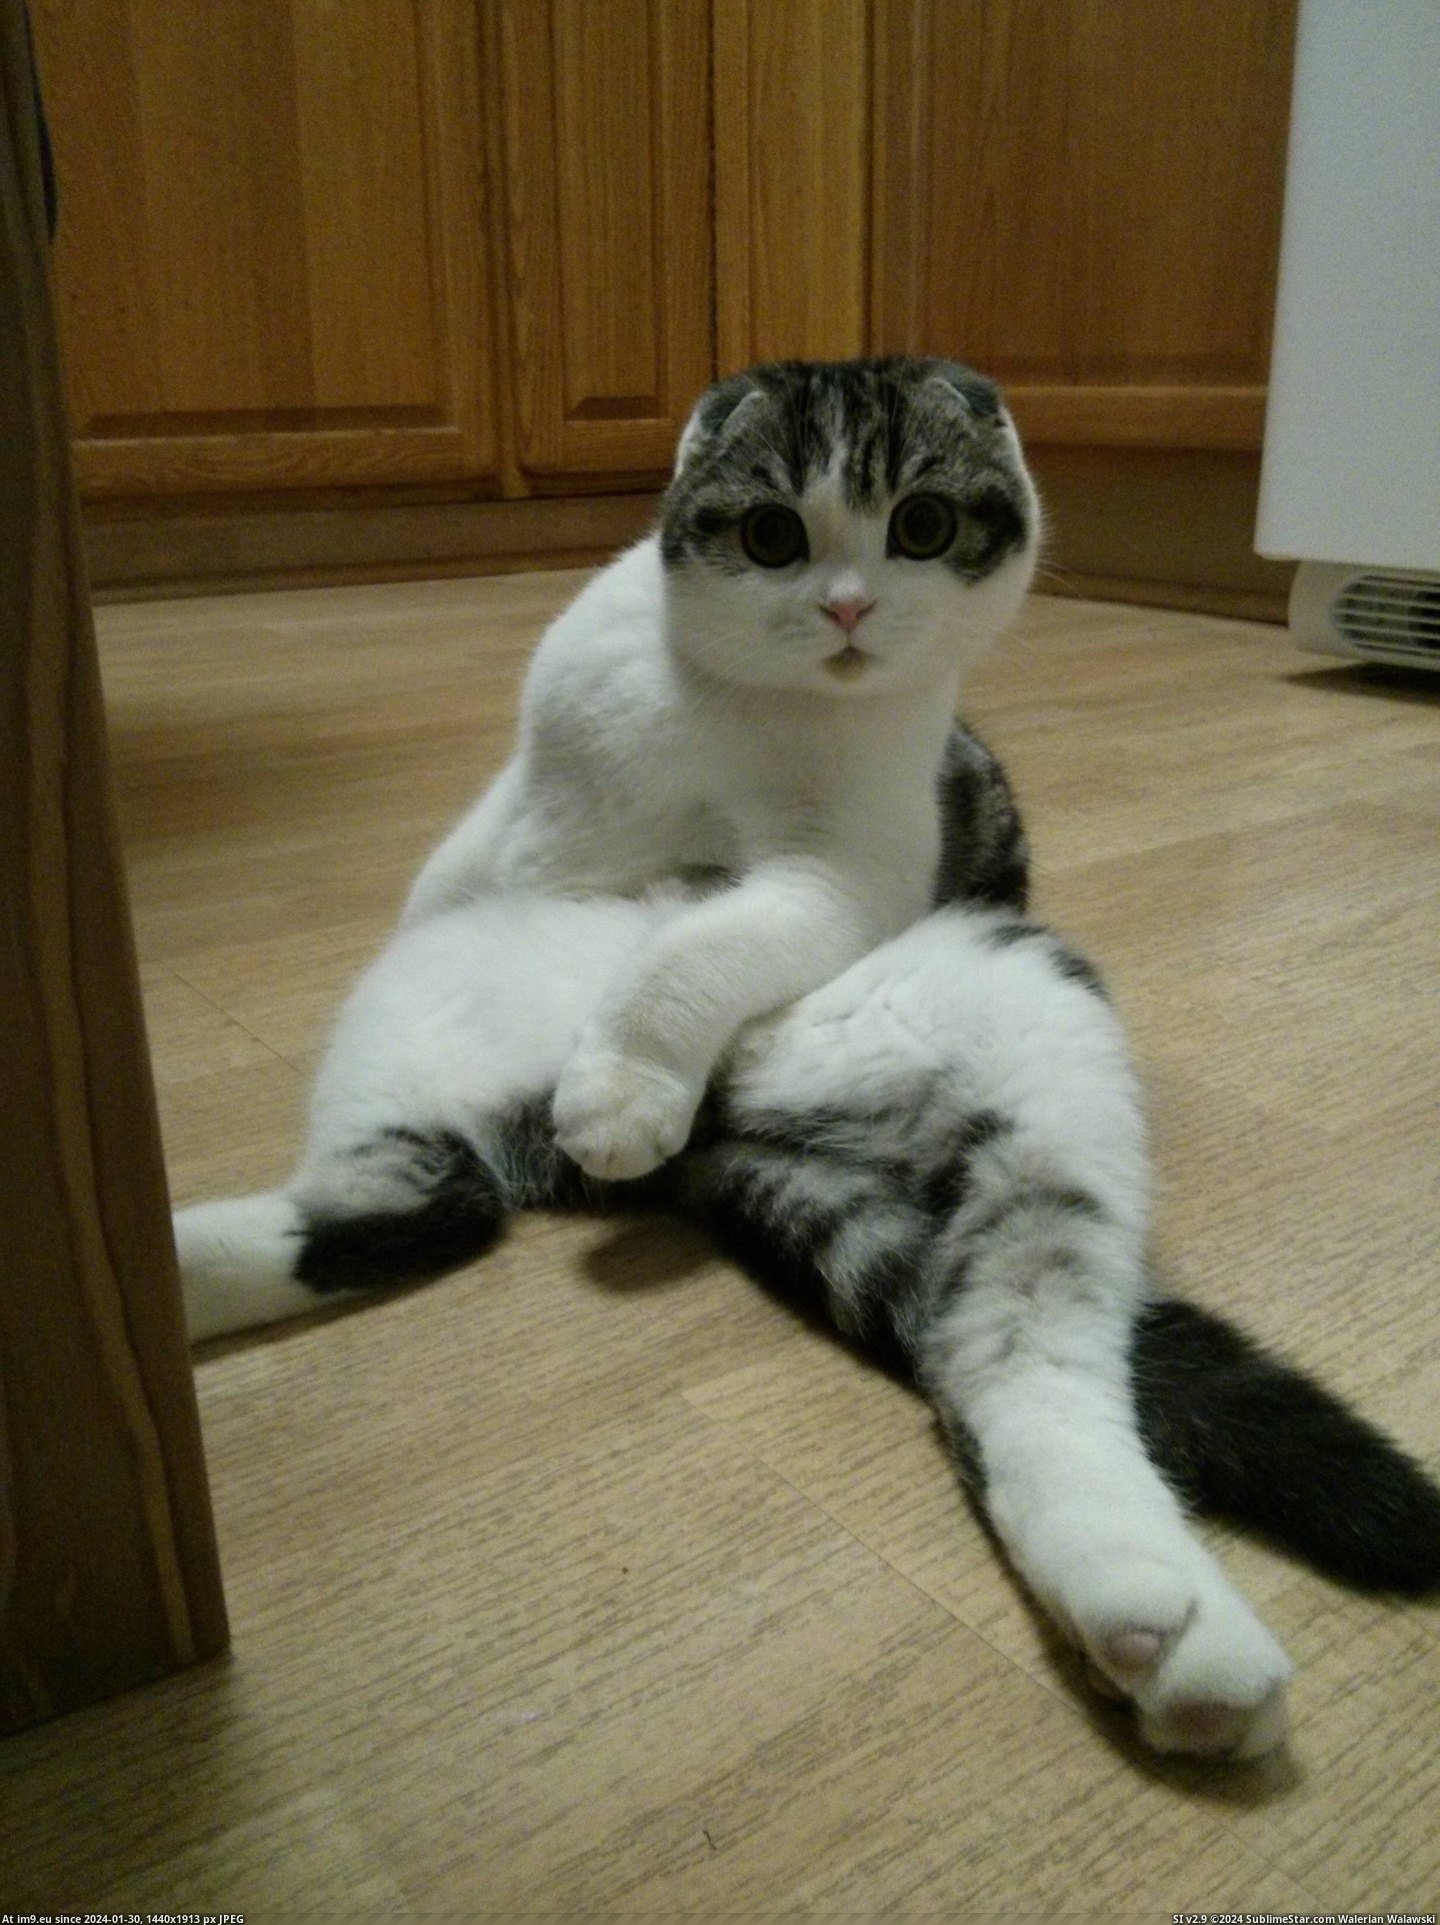 #Butt #Sits #Cat [Aww] My cat always sits on his butt. 4 Pic. (Изображение из альбом My r/AWW favs))